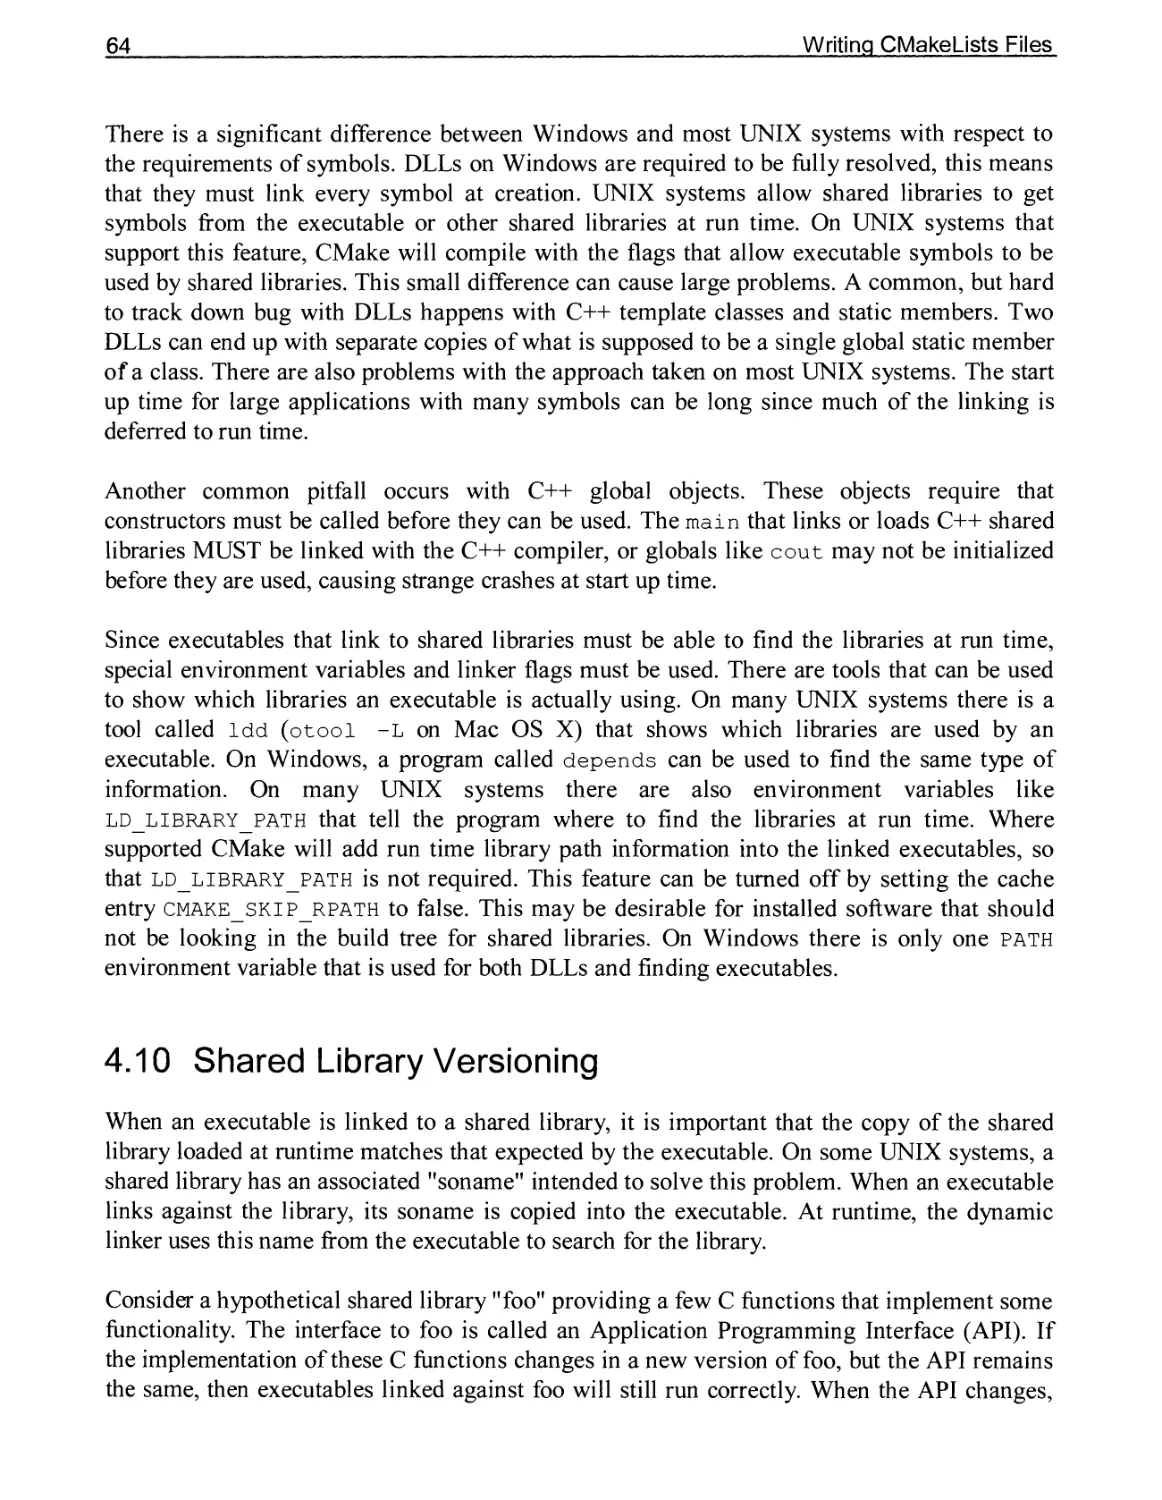 4.10 Shared Library Versioning